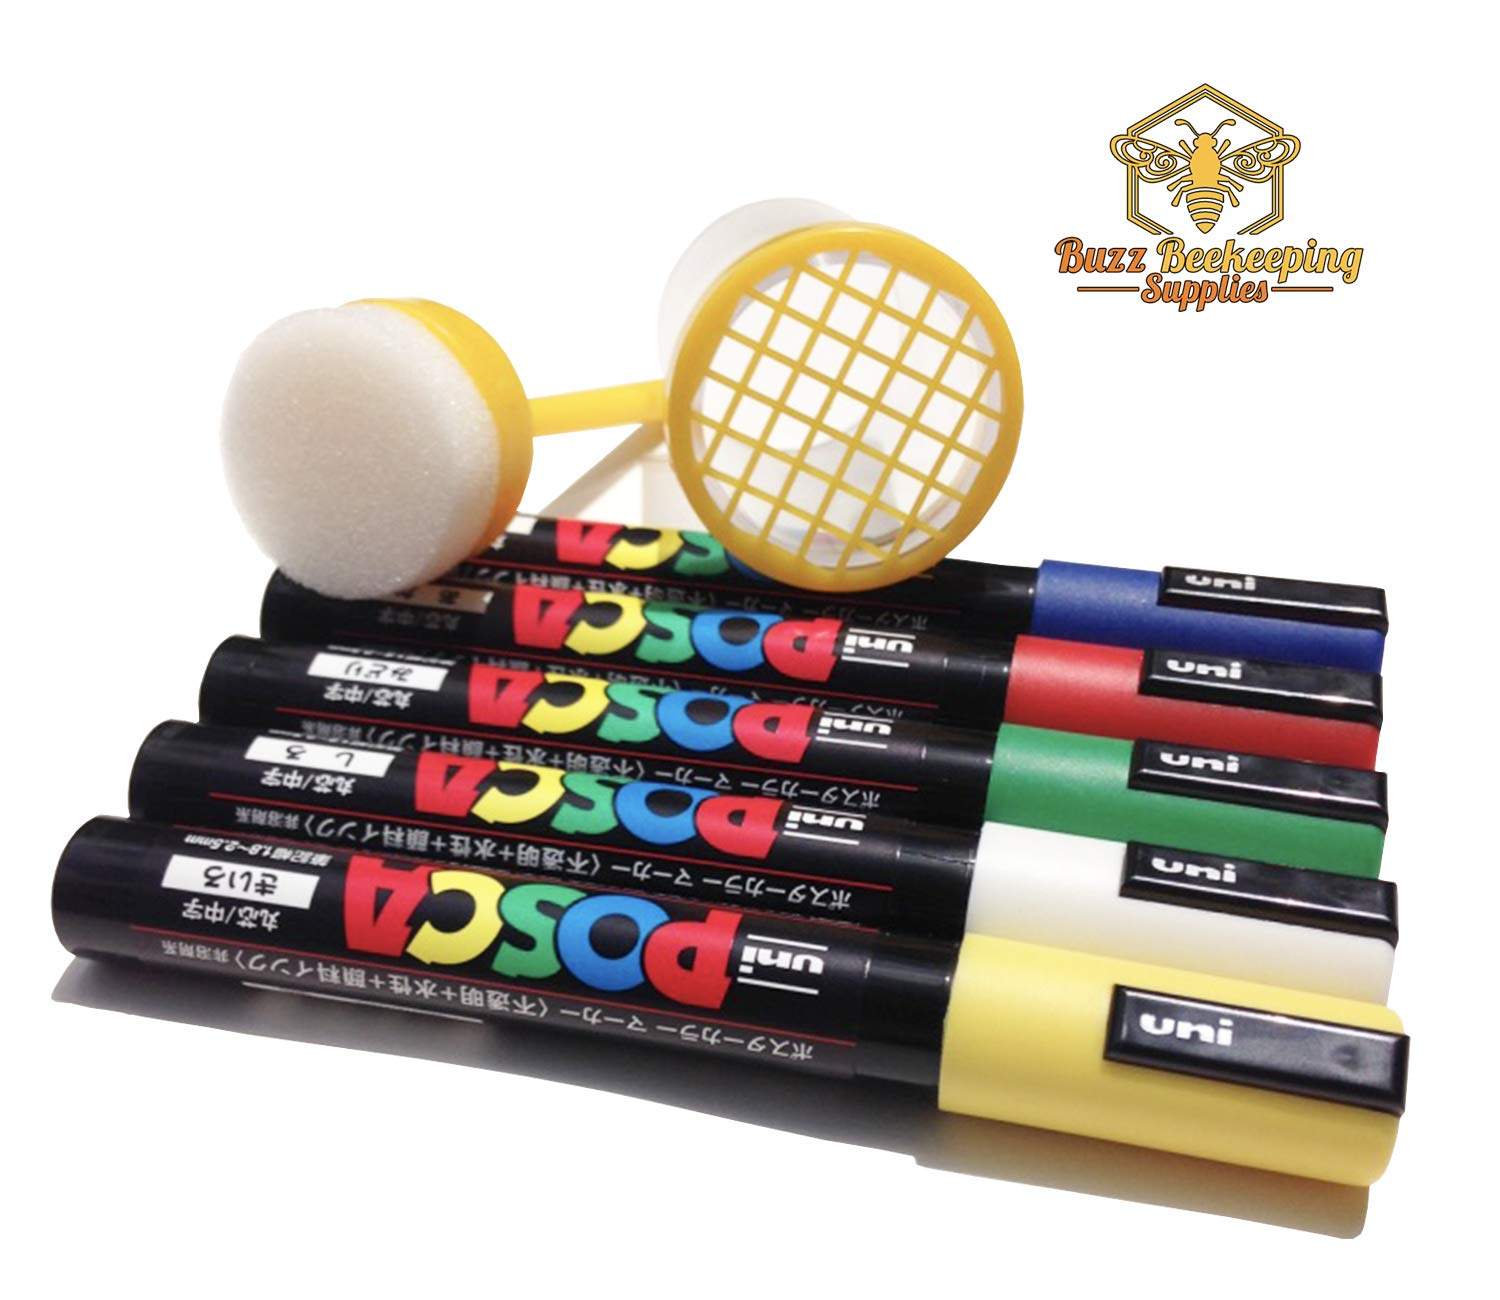 Uni Posca White Posca Water Based, Non Toxic Paint Pen Marker For Marking  Queen Bees Safely With A White Dot